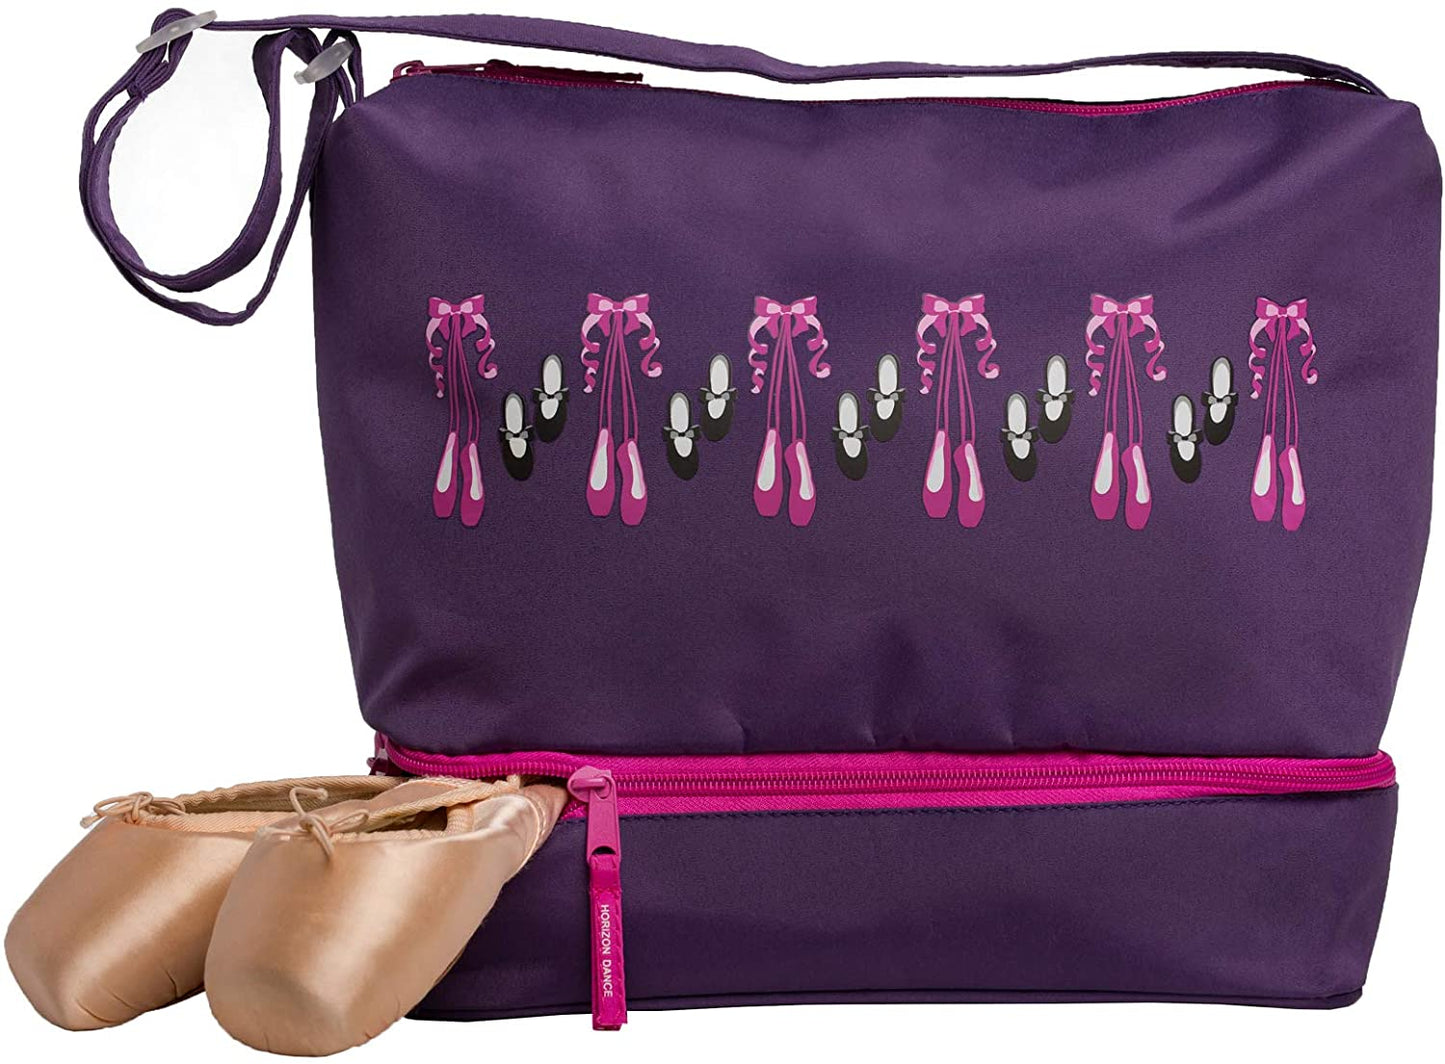 Viola Ballet and Tap Dance Small Gear Tote Bag with Shoe Compartment 9409